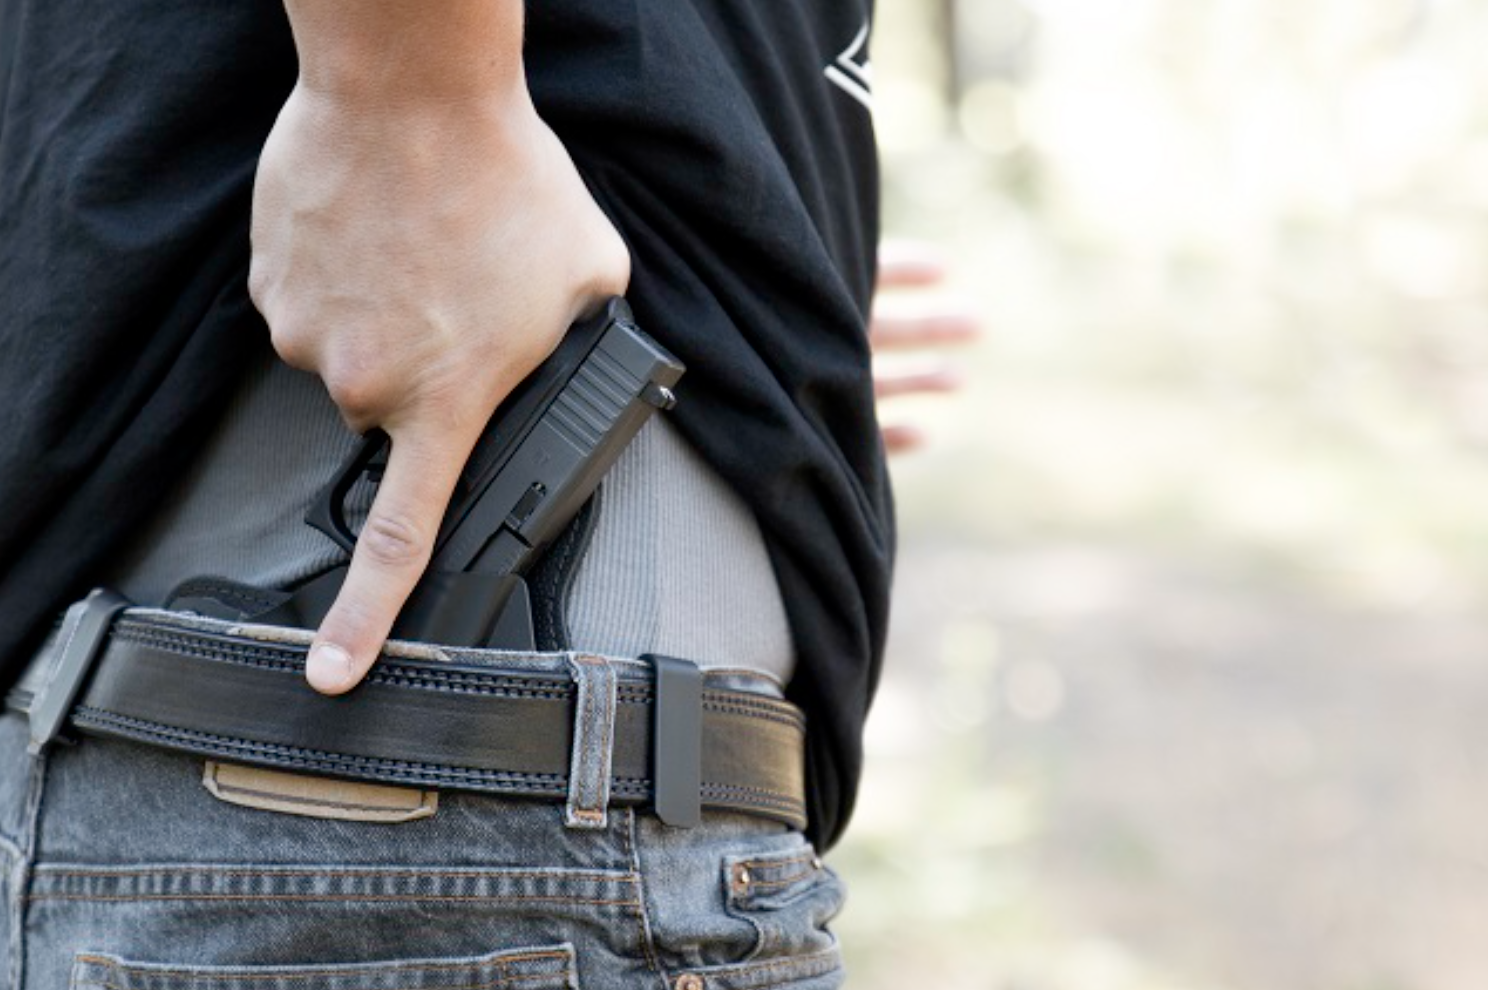 Florida's New No-Permit Concealed Carry Law